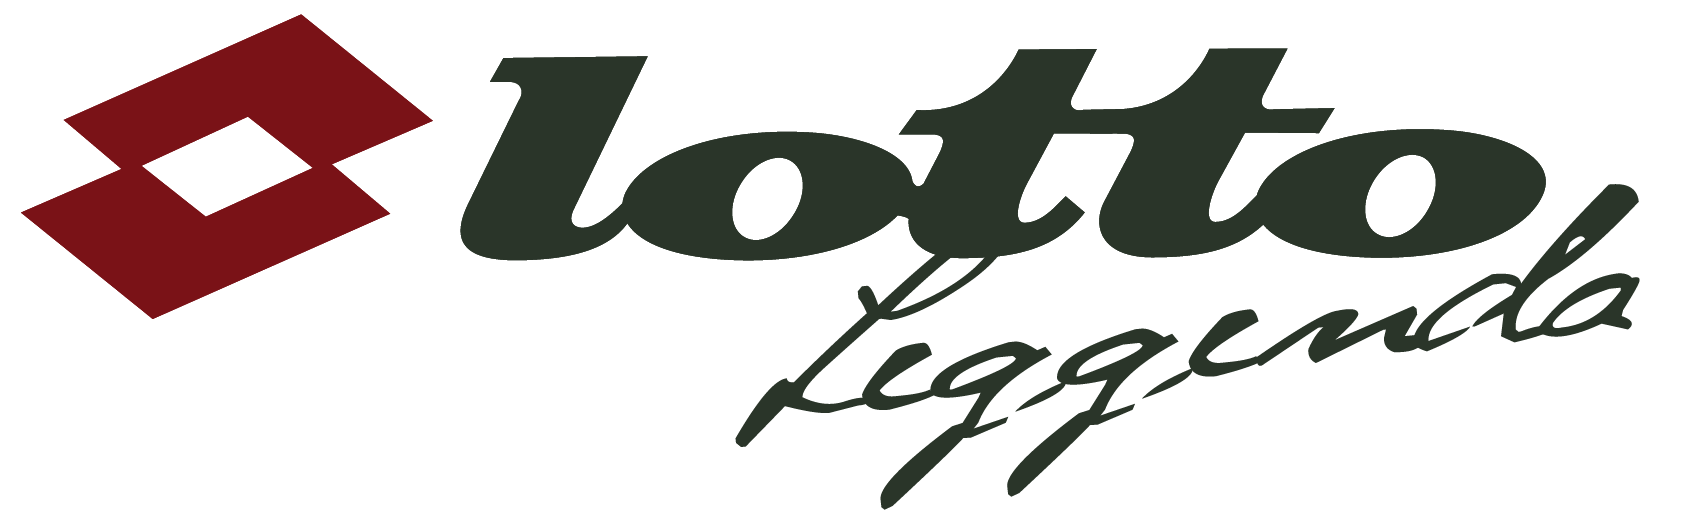 Lotto Sport South Africa Official Supplier.